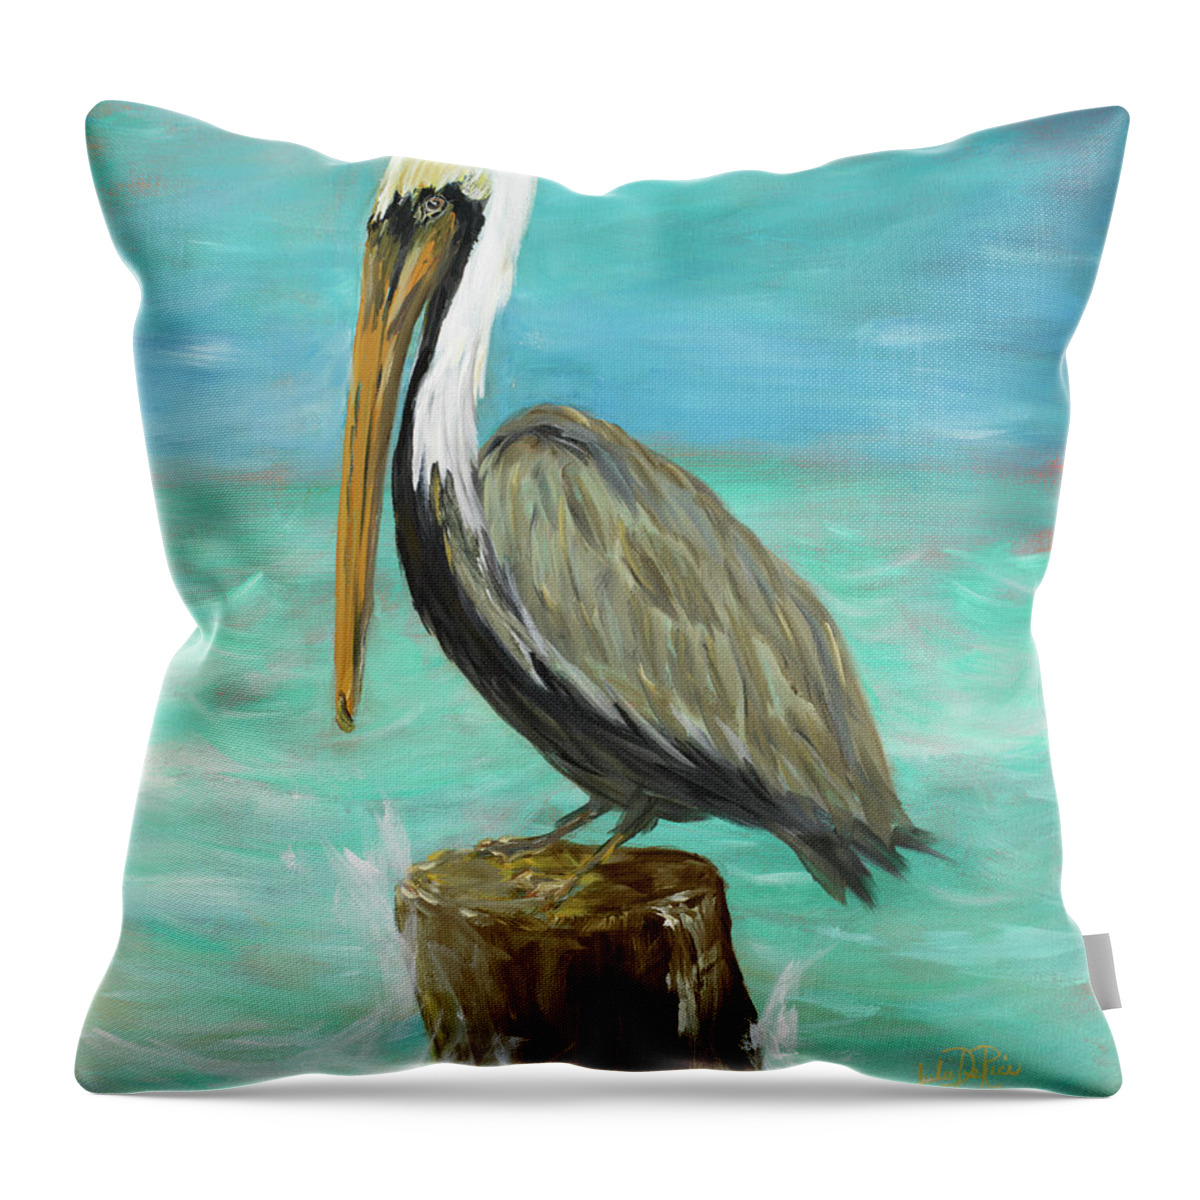 Single Throw Pillow featuring the painting Single Pelican On Post by Julie Derice